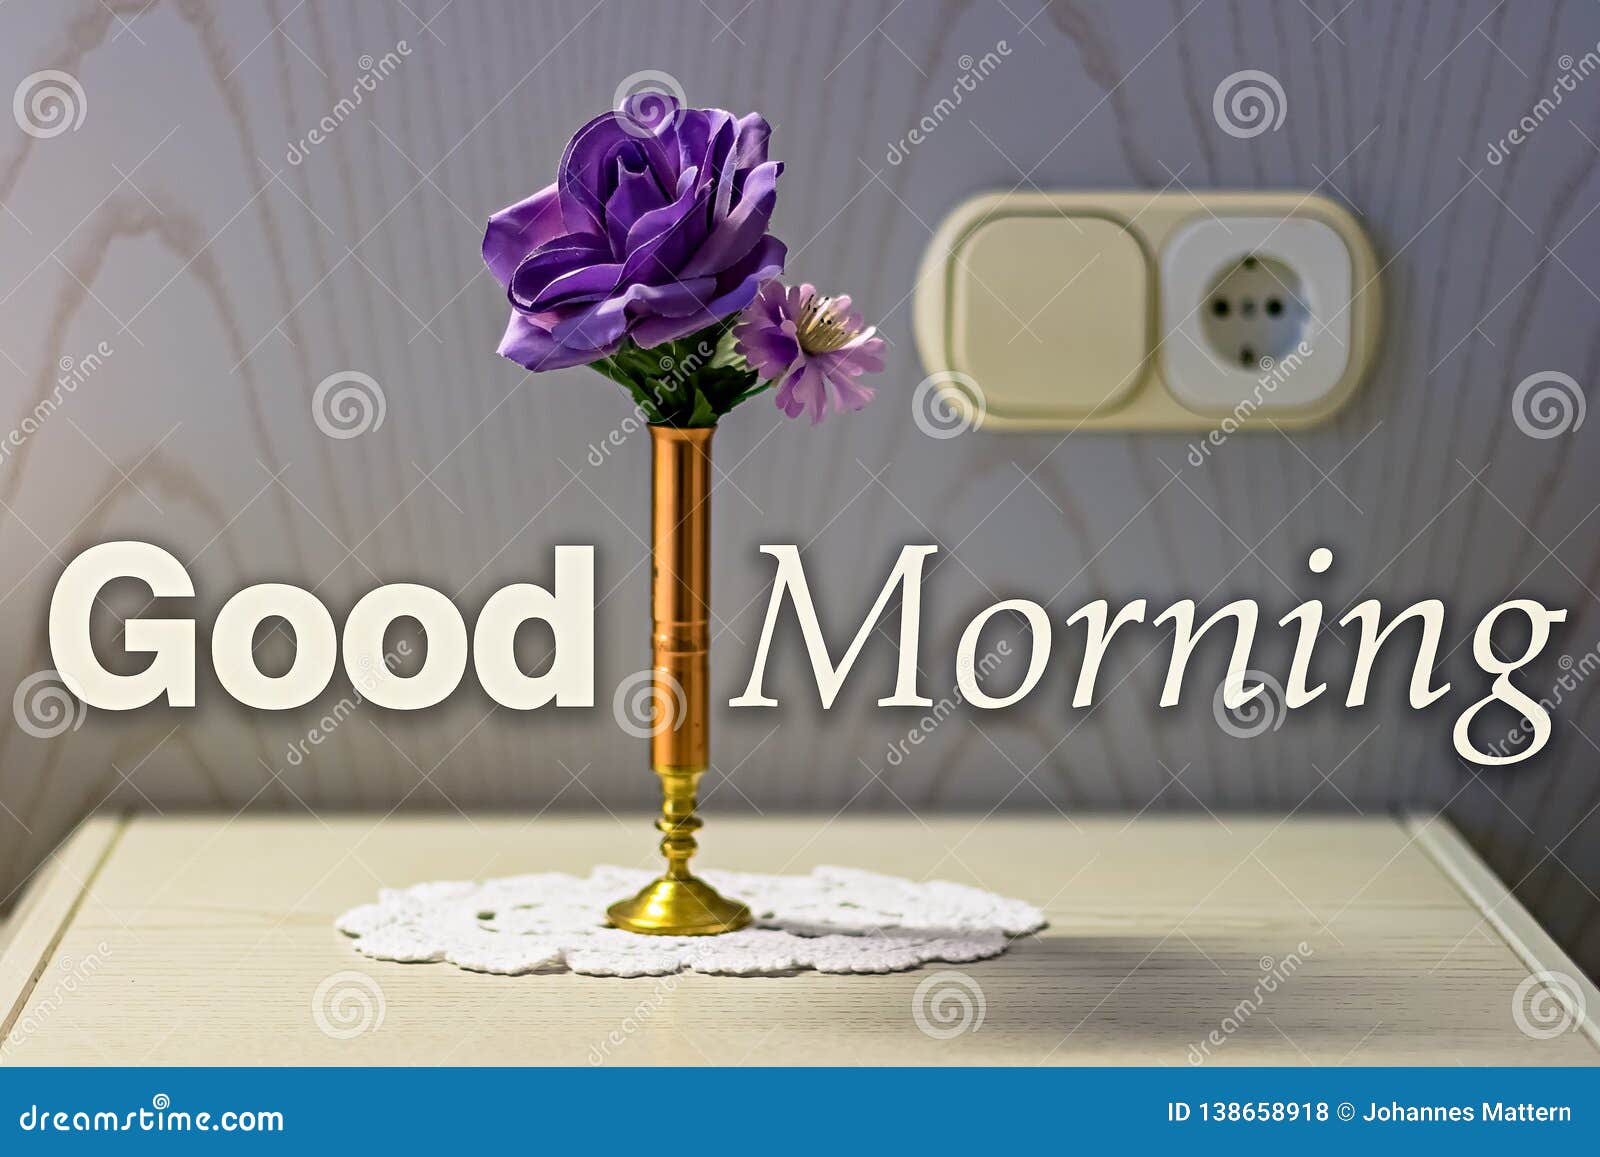 Good Morning Concept in English Stock Photo - Image of flower ...